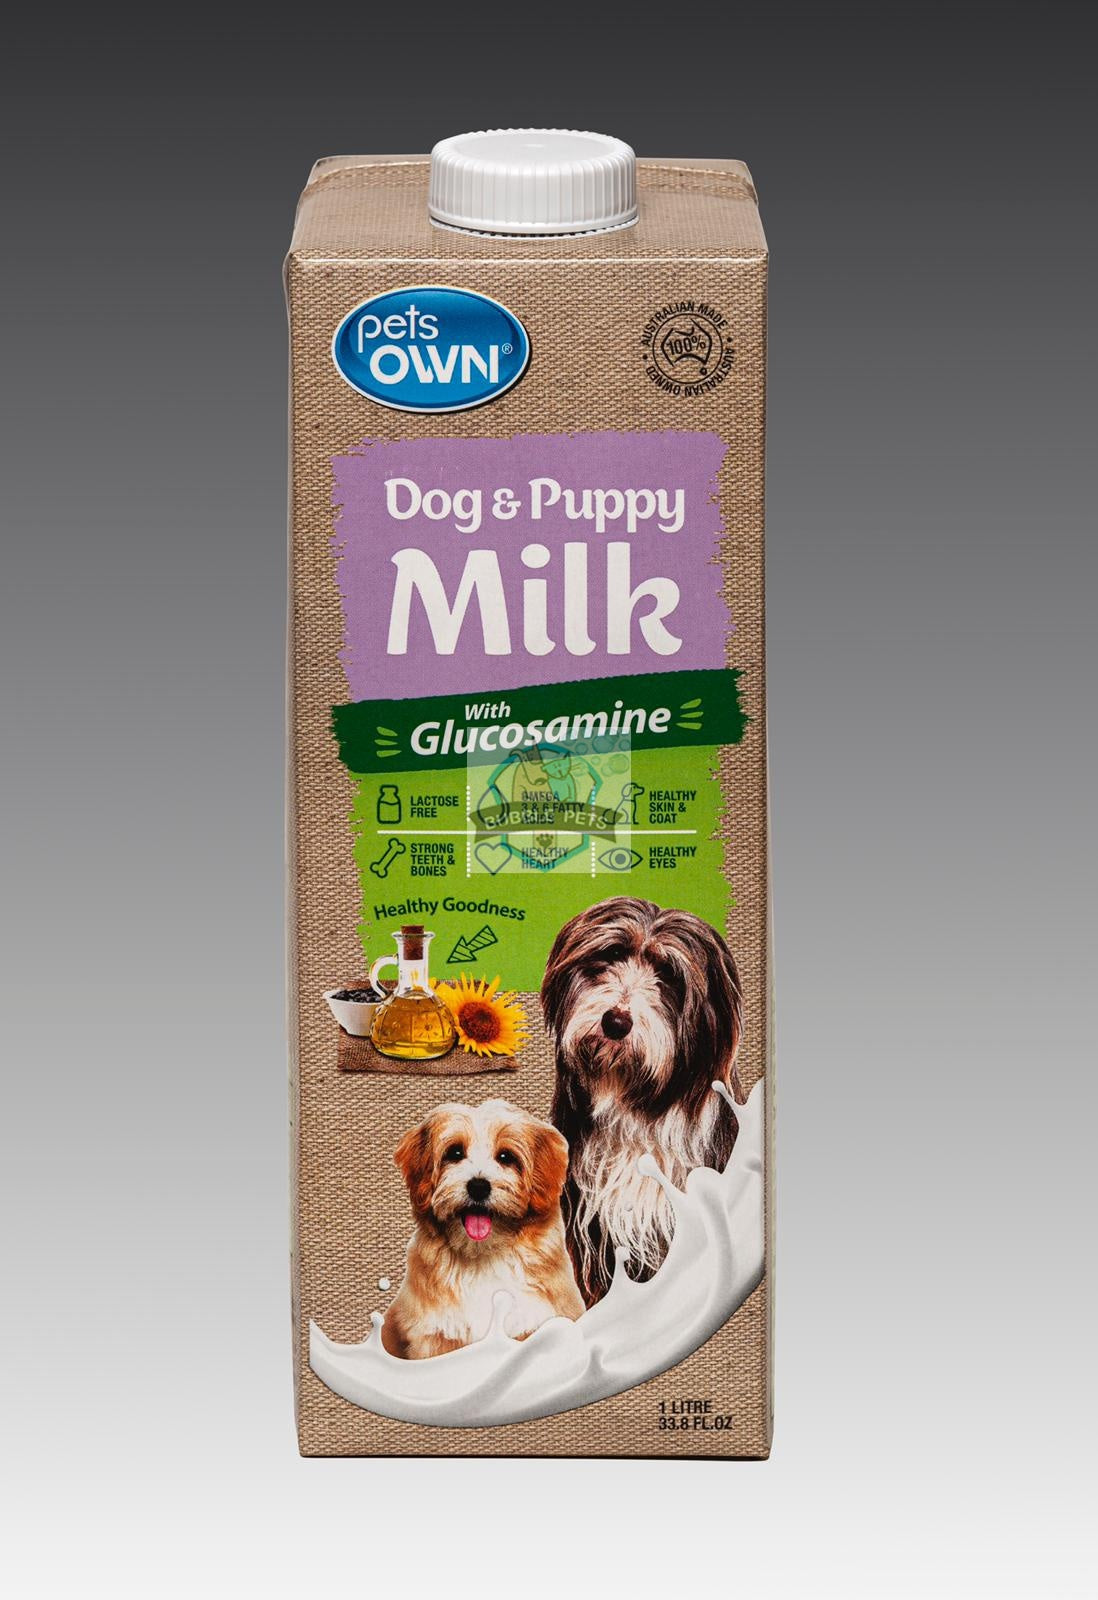 Pets Own Dogs & Puppies Milk with Glucosamine